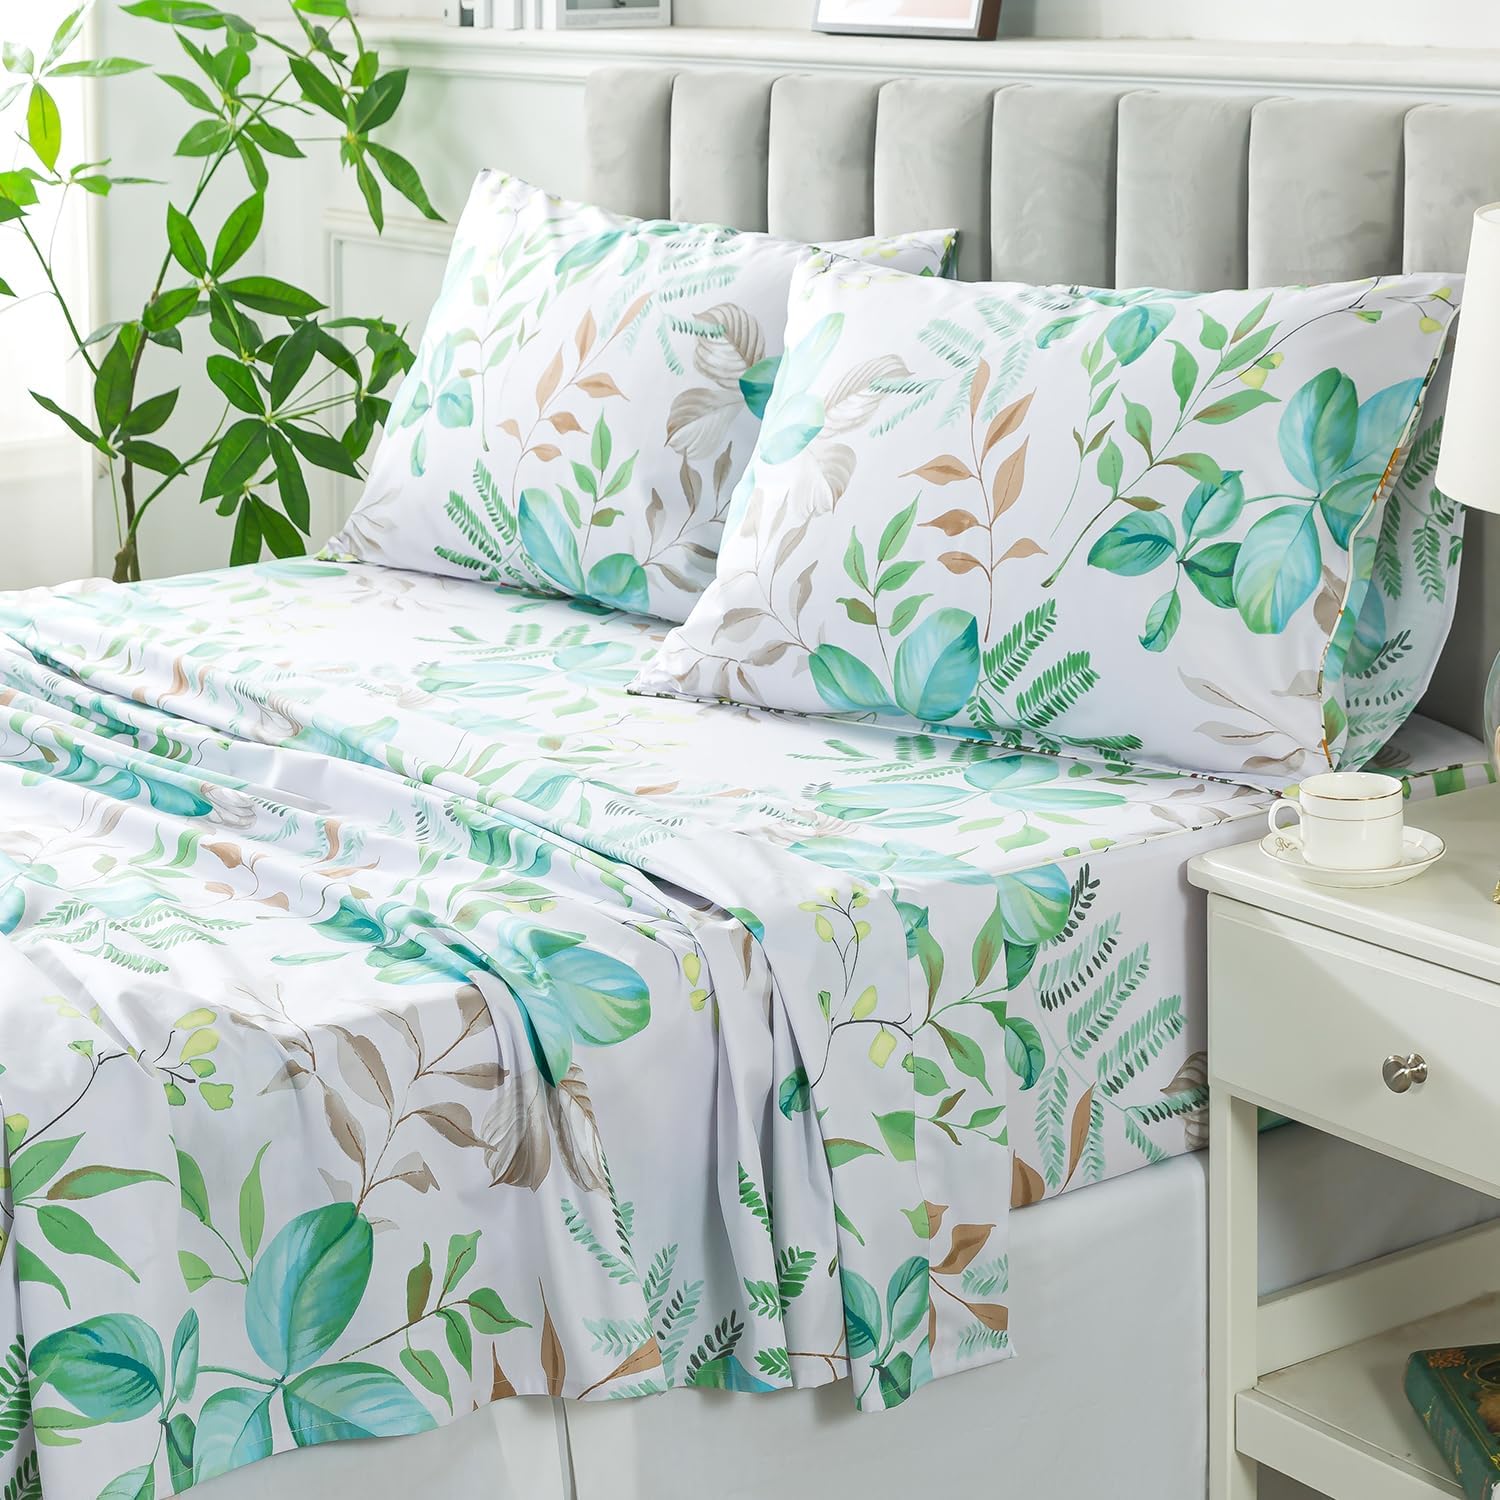 FADFAY Queen Sheet Set 100% Cotton Teal Green Leaf Pattern Printed Bed Sheets, Botanical Sheets Leaves Pattern Modern Minimalist Bedding, Soft Crisp & Cool Luxury Deep Pocket Fitted Sheet, 4Pc